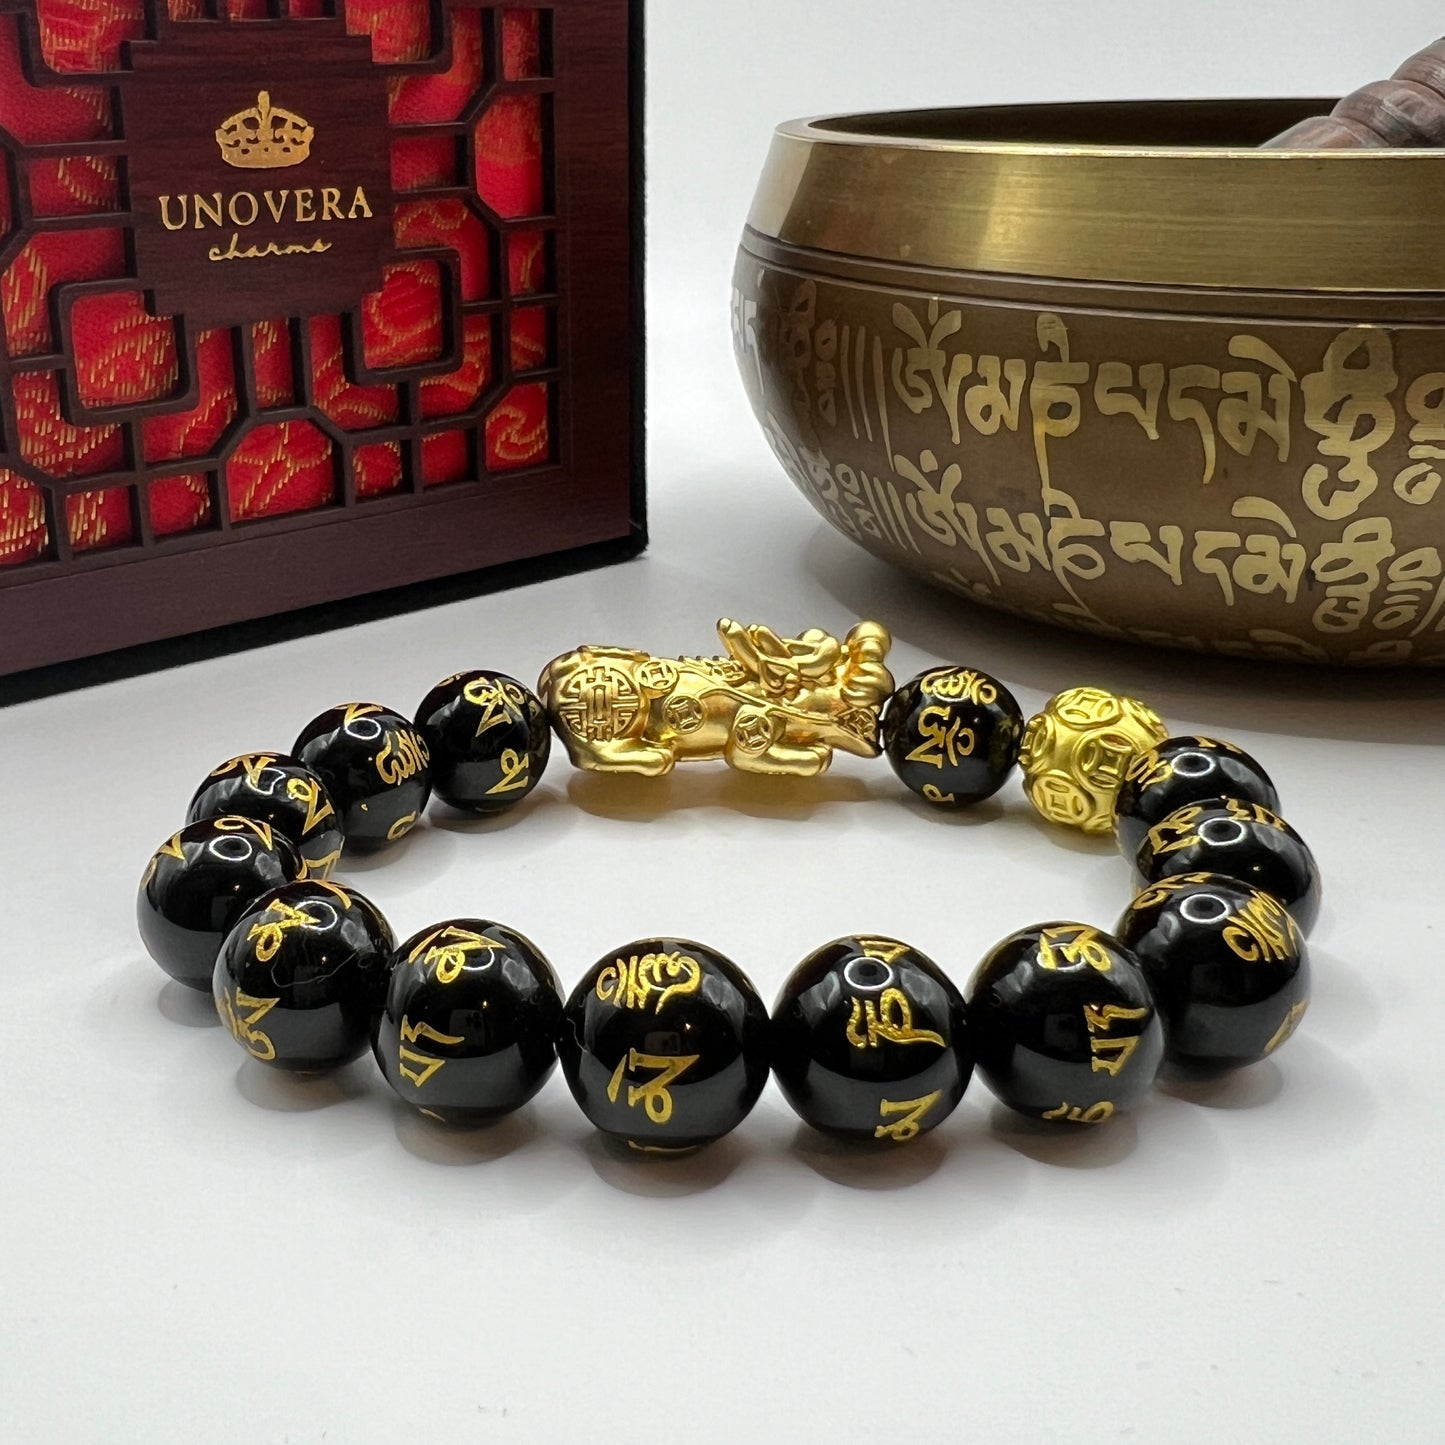 12mm Black Onyx Mantra with 24 Karat Gold Lucky PiYao and Money Ball for Abundance and Money Catcher